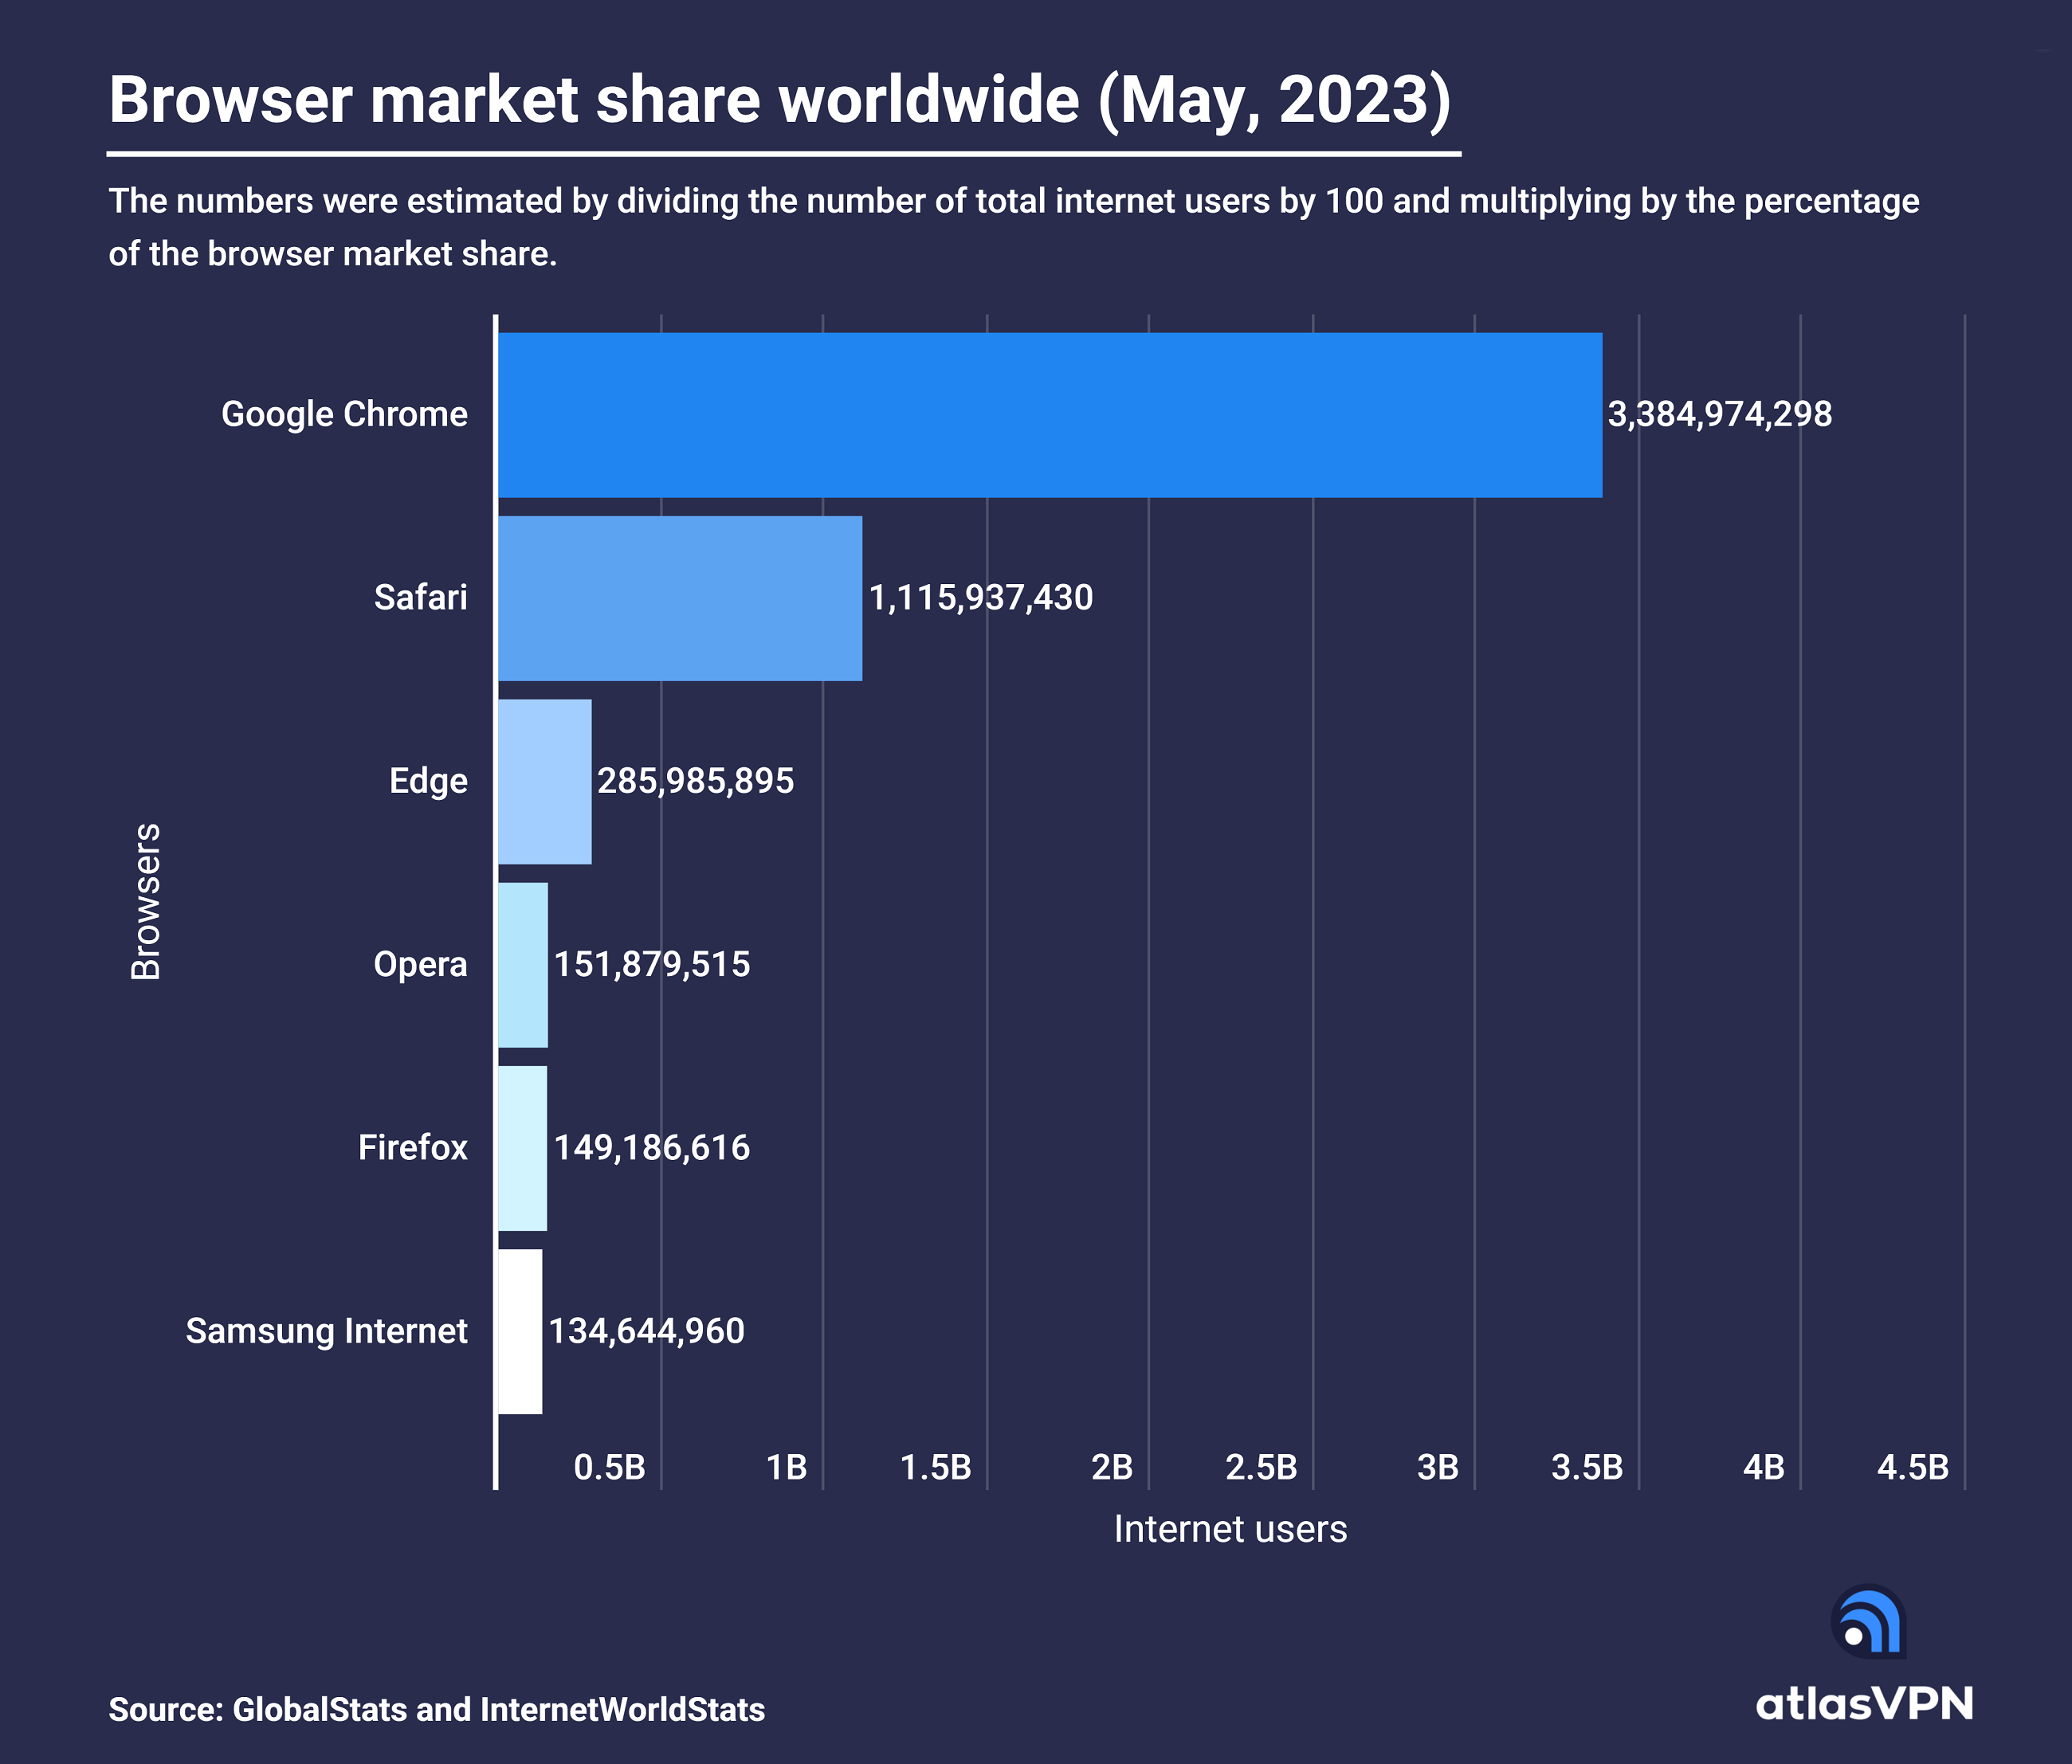 This chart shows Browser market share worldwide